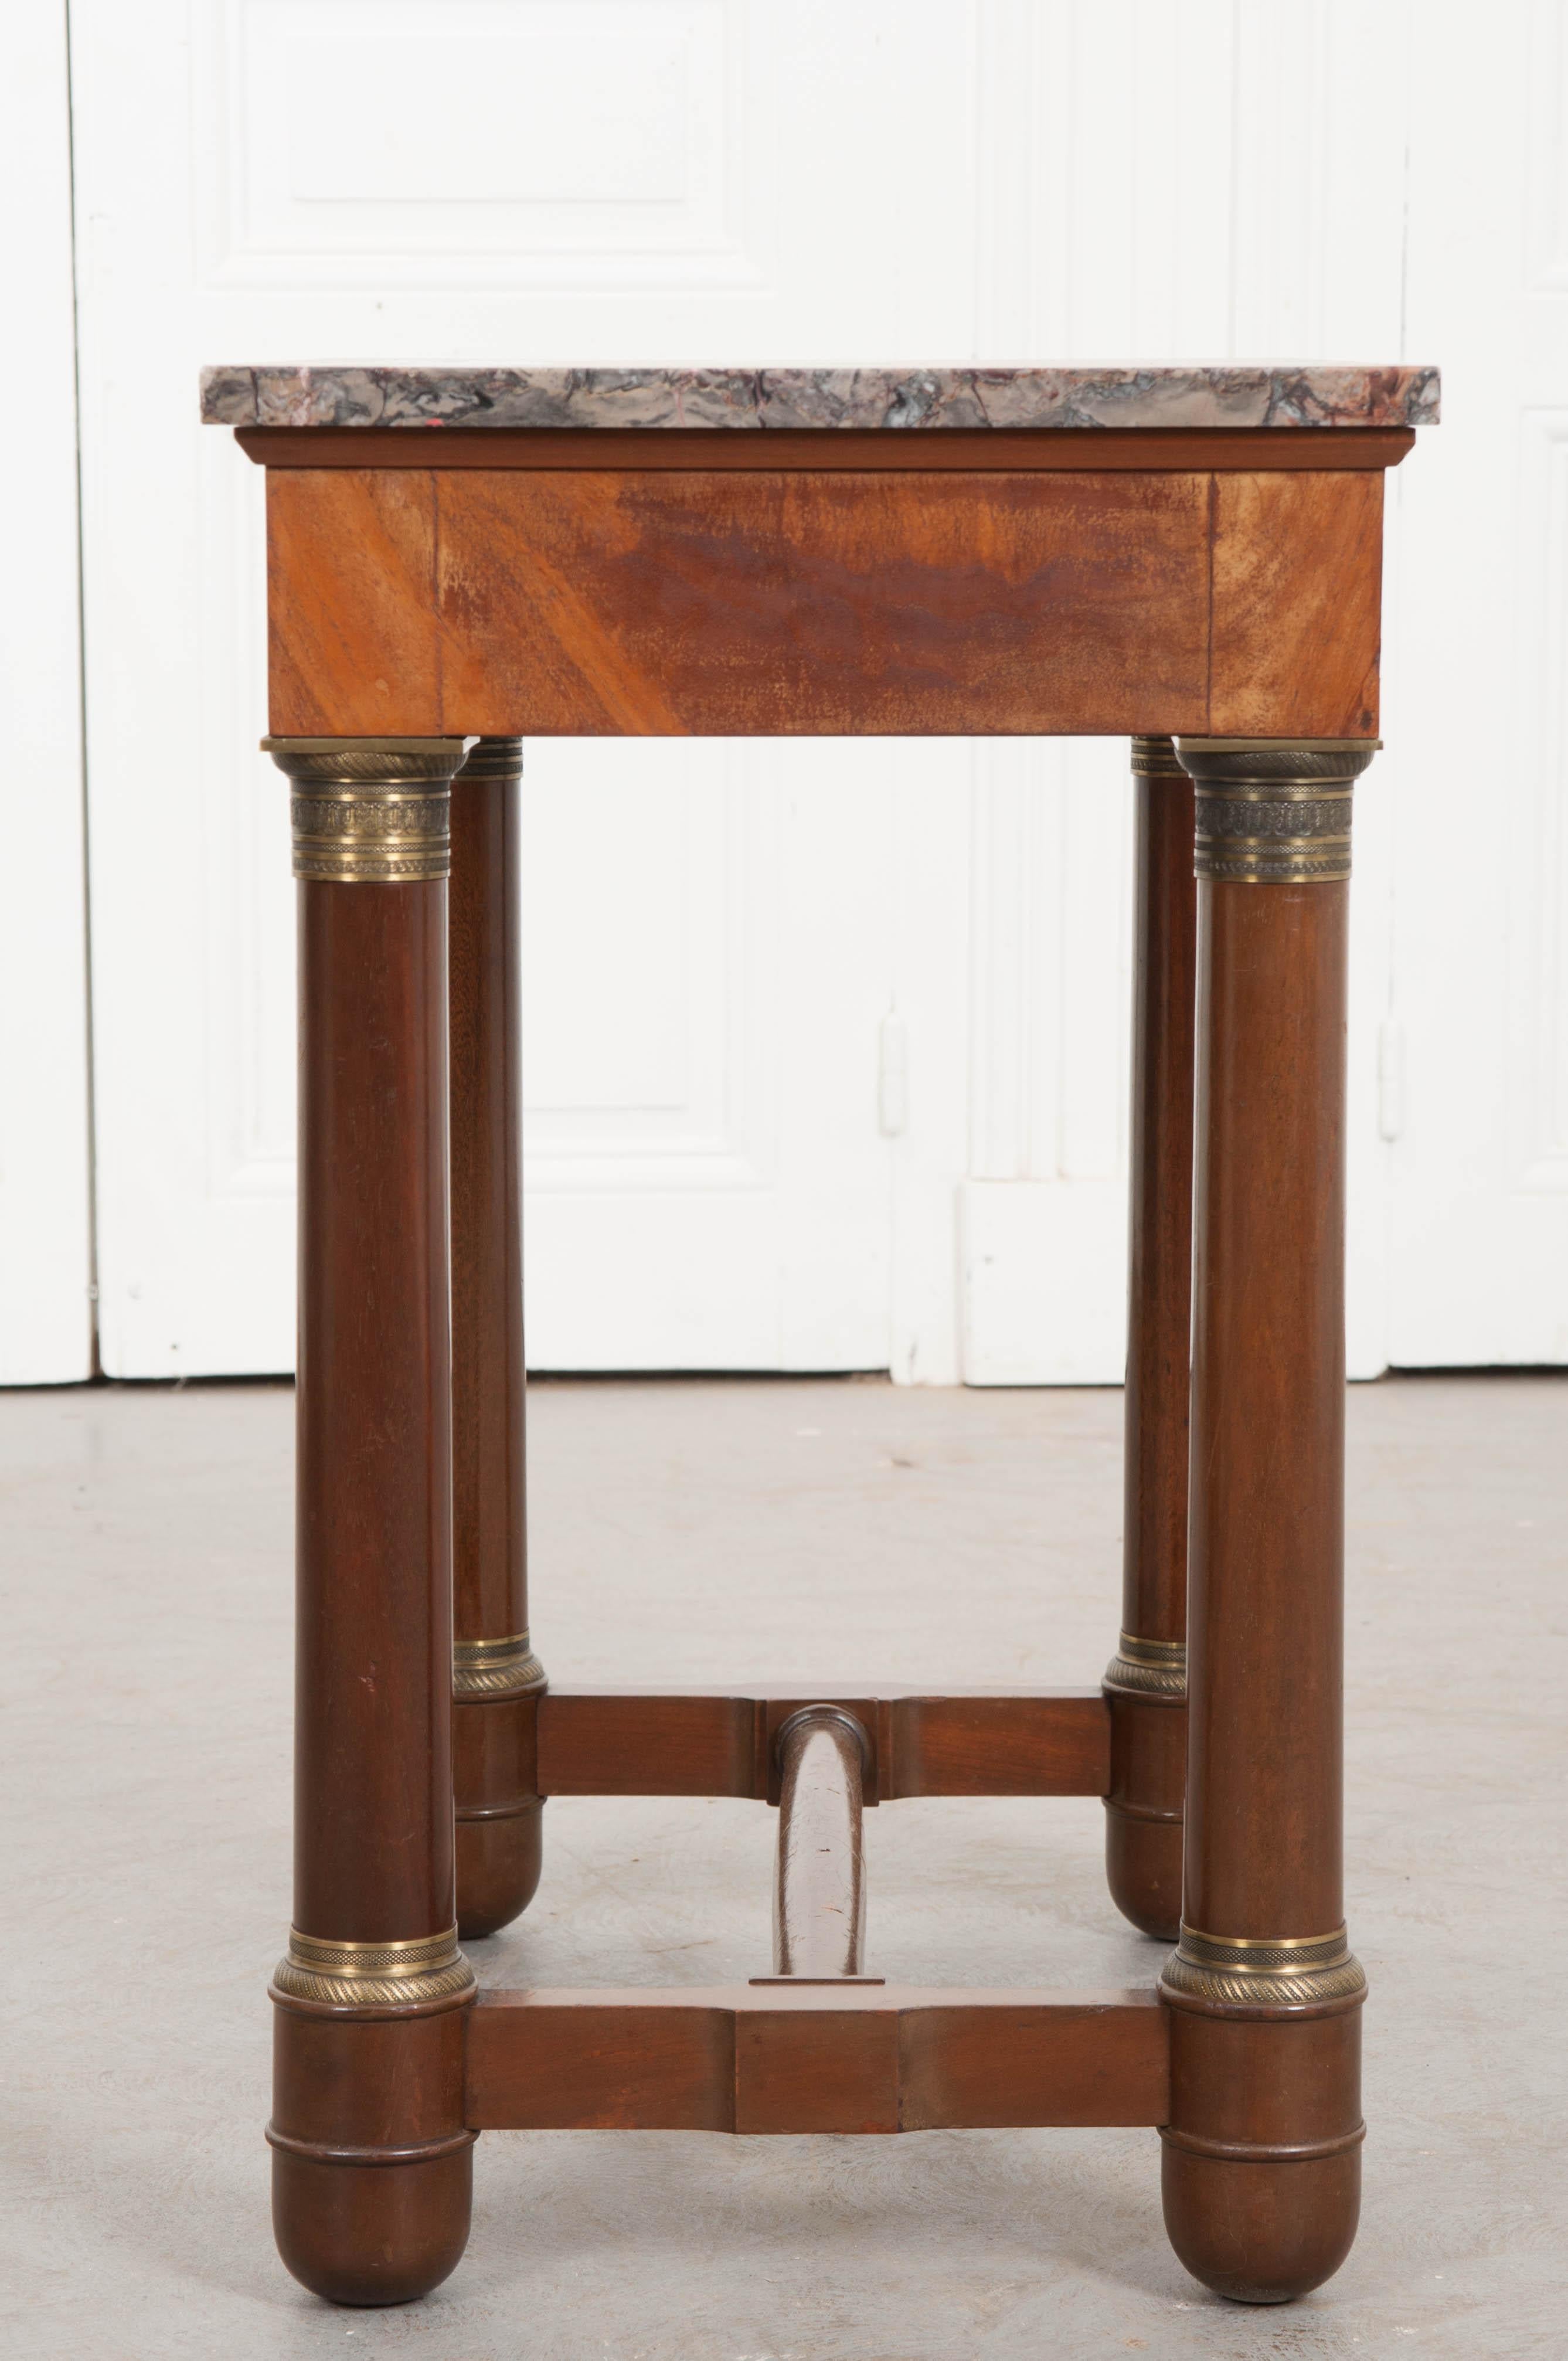 An Empirically styled mahogany side or occasional table, with exceptional marble top, from 1930s France. The multicolored marble top is in excellent condition with brilliant veins and coloration. Four column-form legs lift and support the top. They